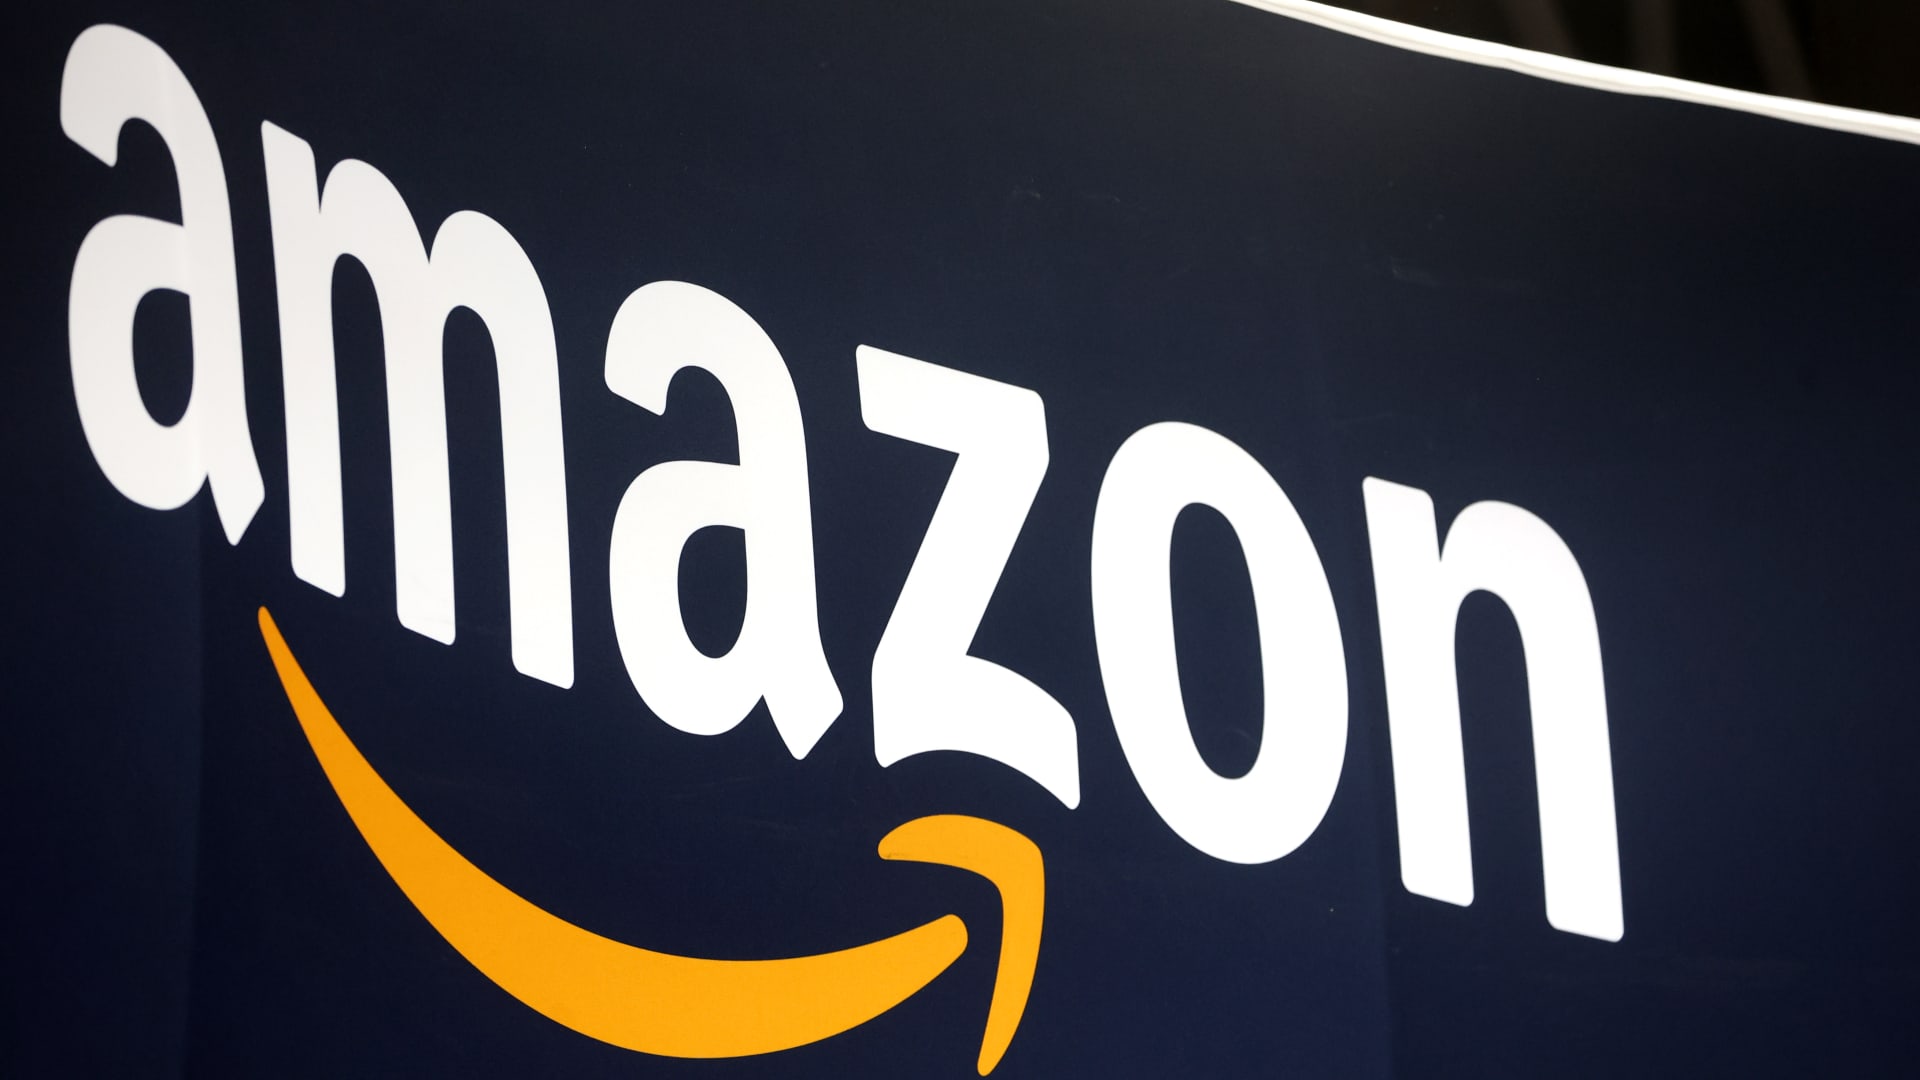 Amazon to invest up to $4 billion in Anthropic, a rival to ChatGPT developer OpenAI